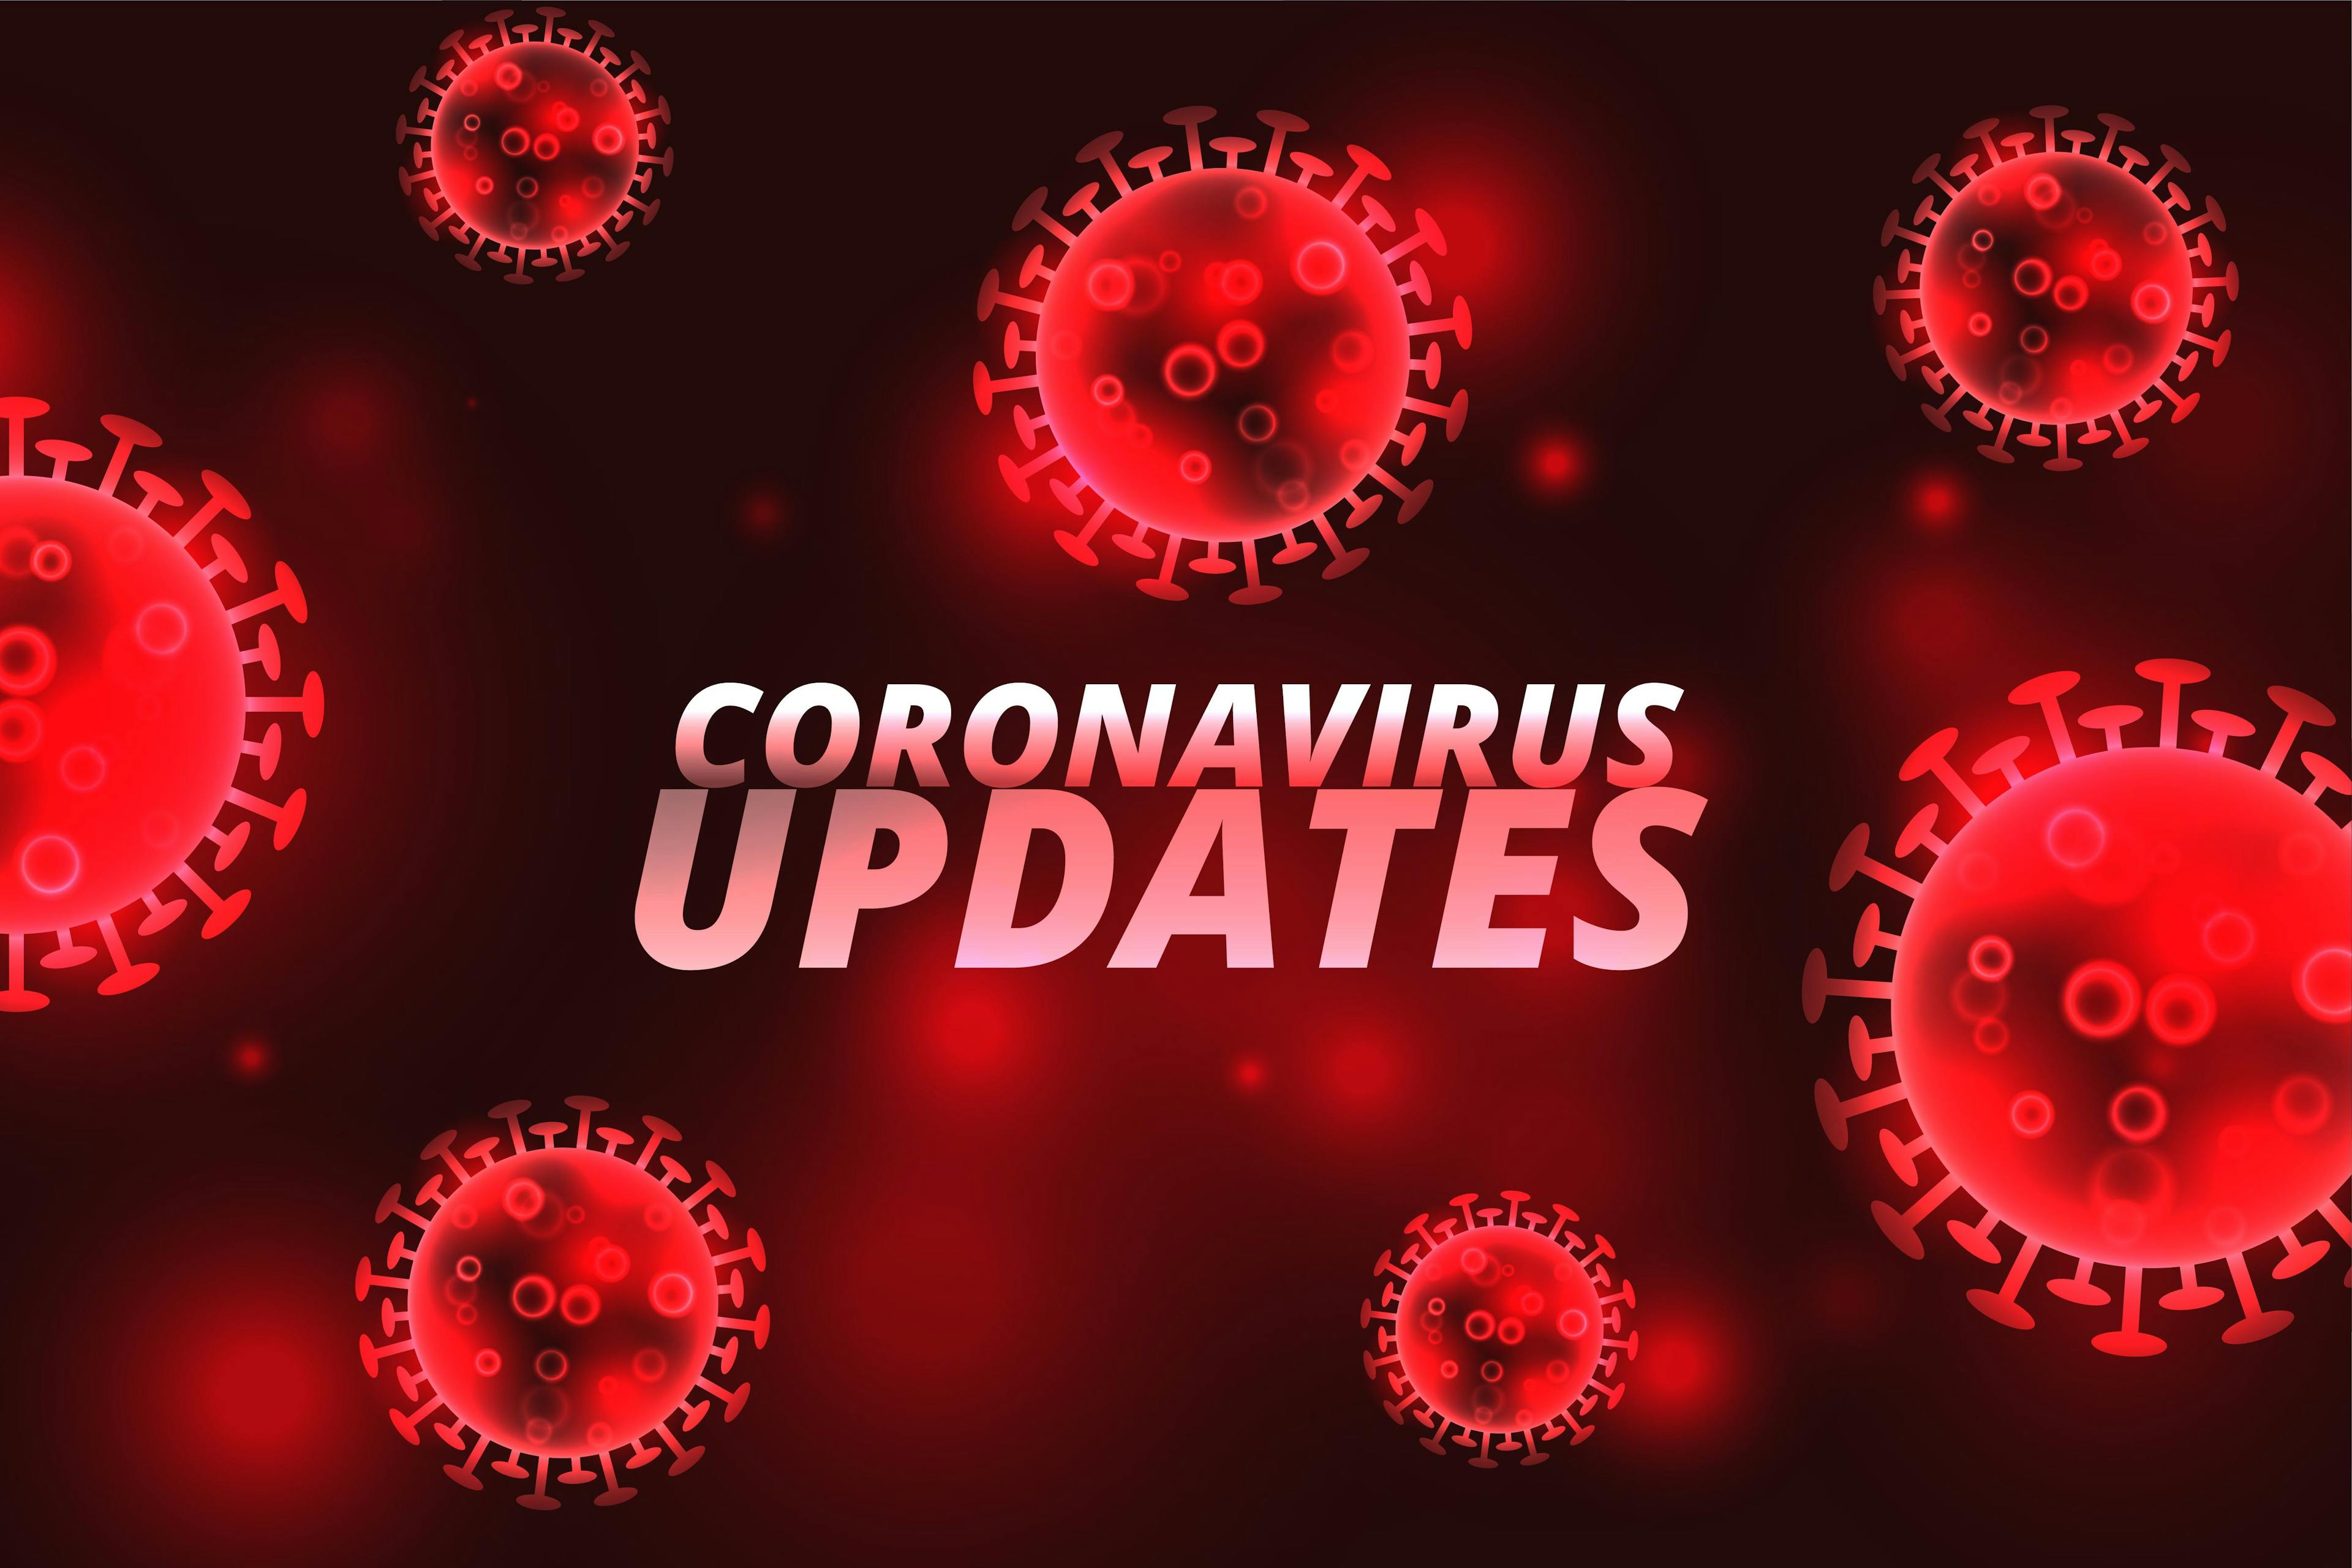 COVID-19 Updates: US Vaccinations and Global Cases and Deaths as of April 19, 2021